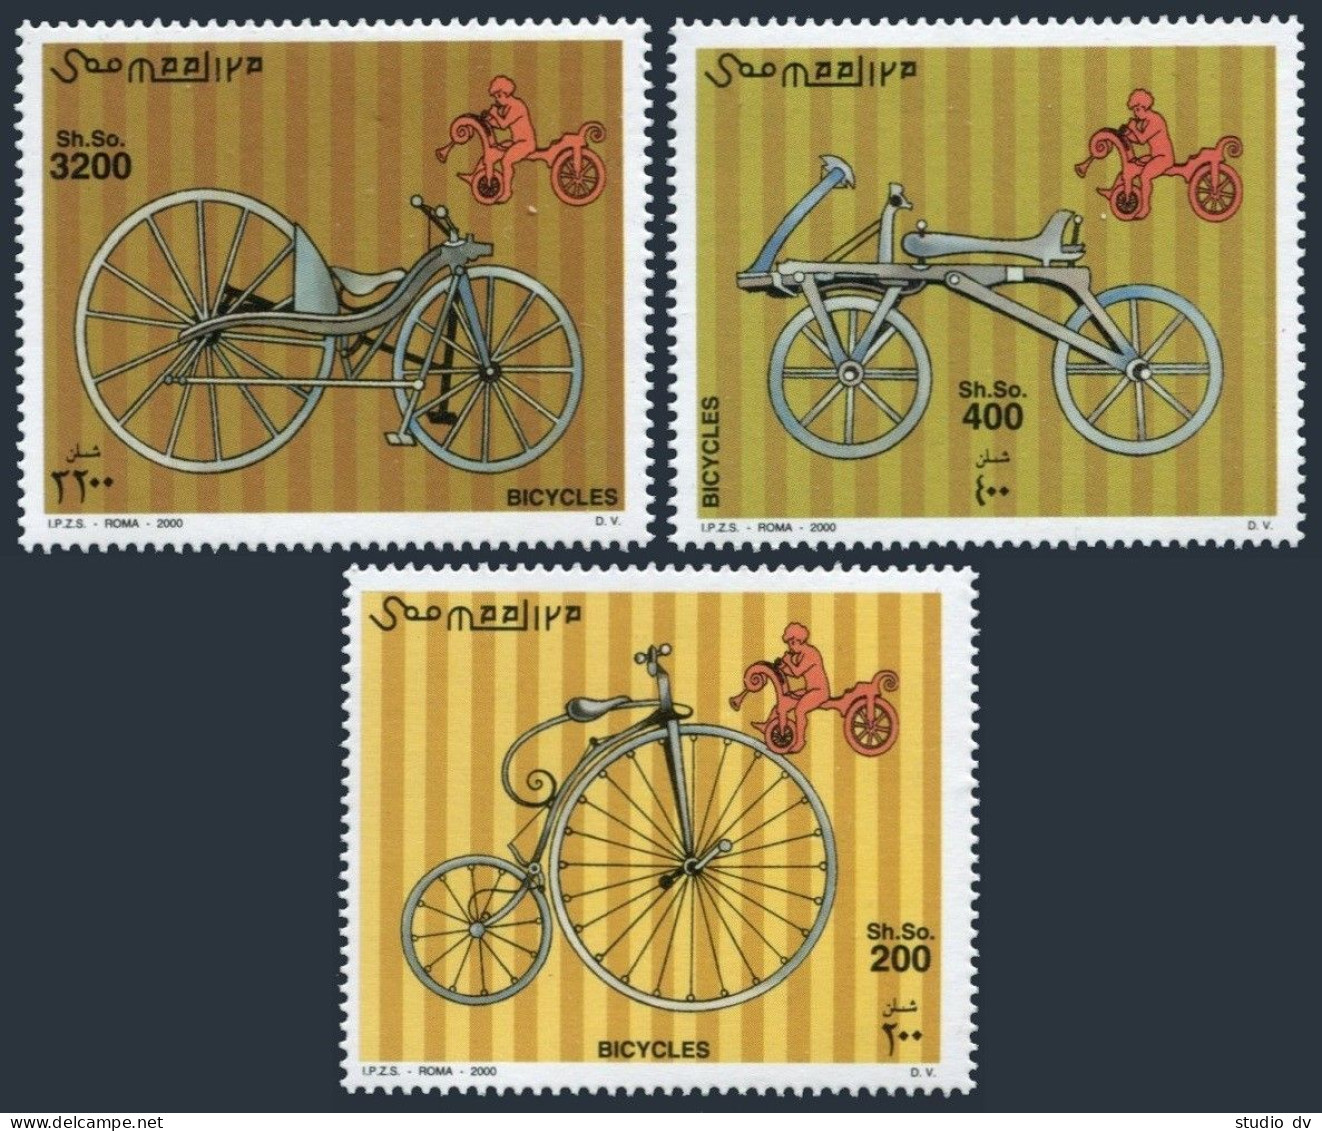 Somalia 819-821 Michel,not Listed In Scott,MNH. Bicycles 2000. - Mali (1959-...)